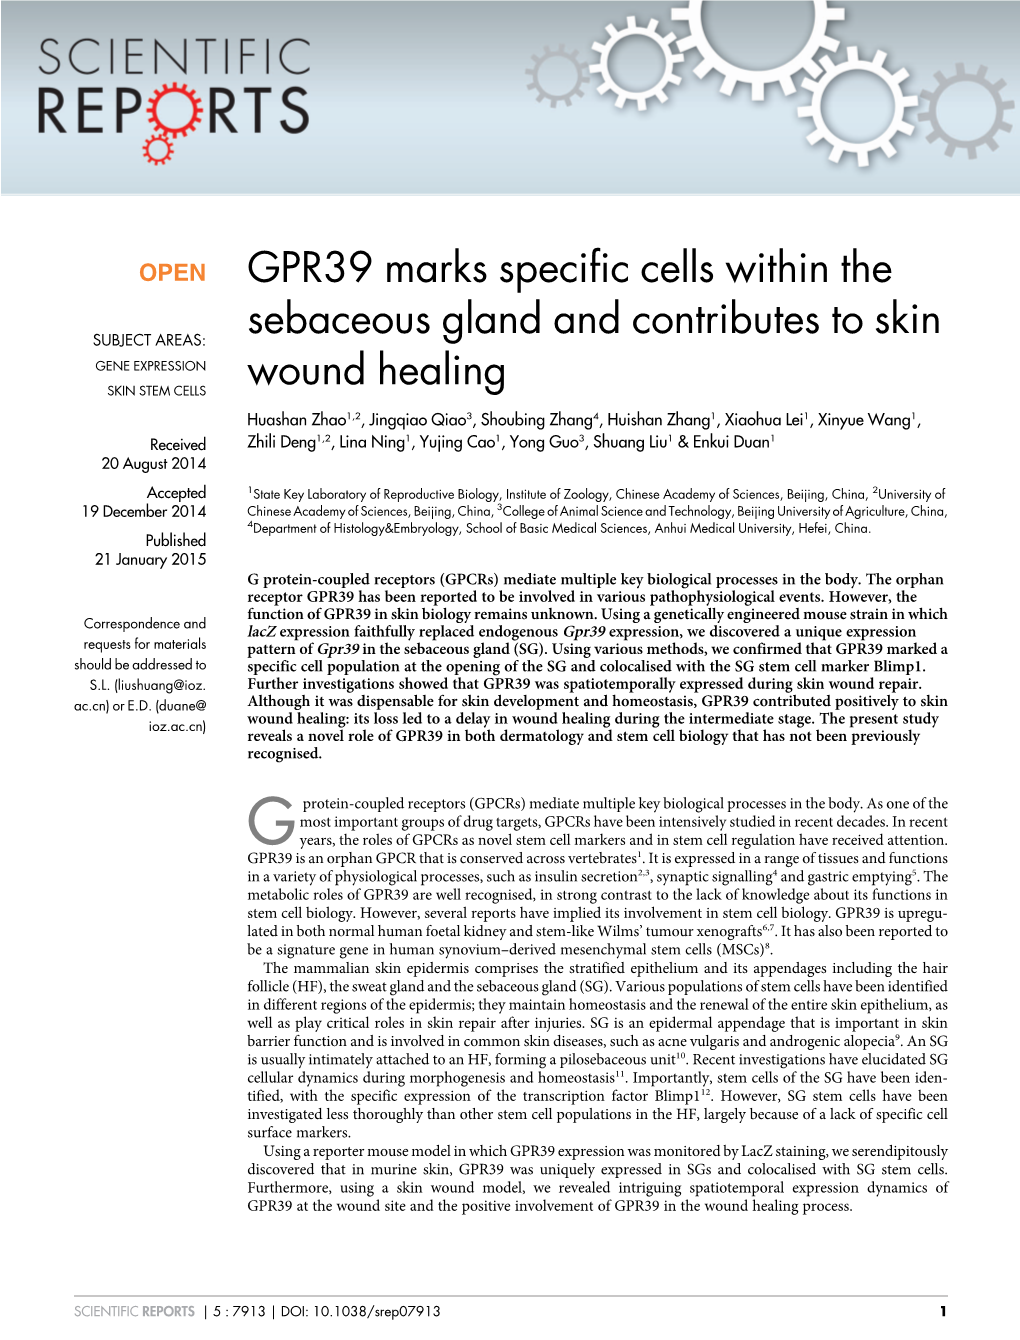 GPR39 Marks Specific Cells Within the Sebaceous Gland and Contributes To